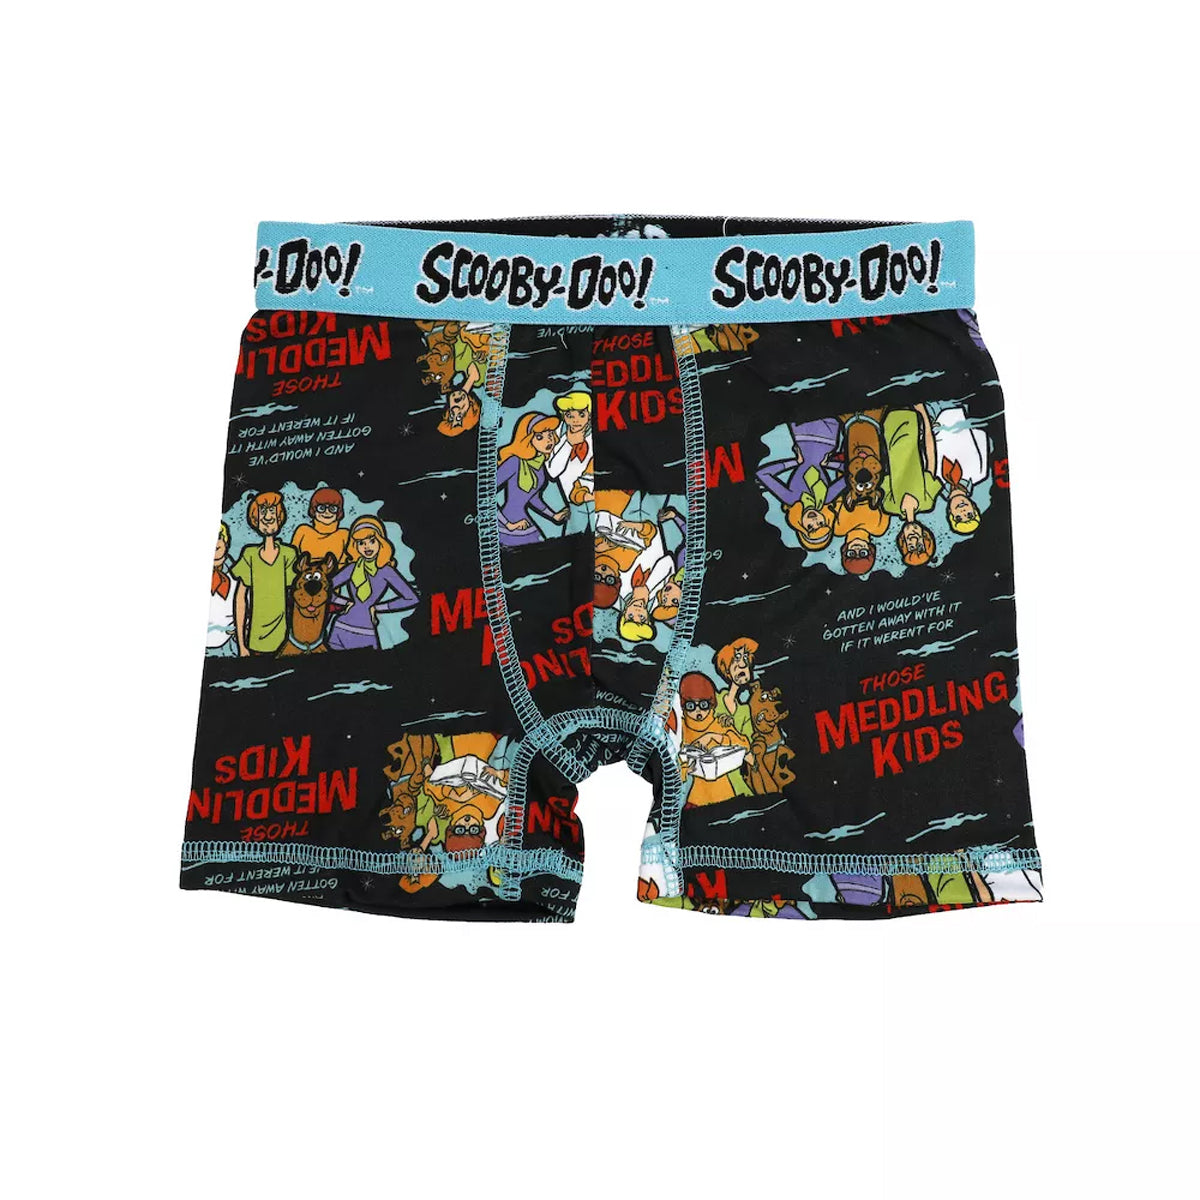 4pk Boys Stretch Sport Boxer Briefs With Favorite Characters